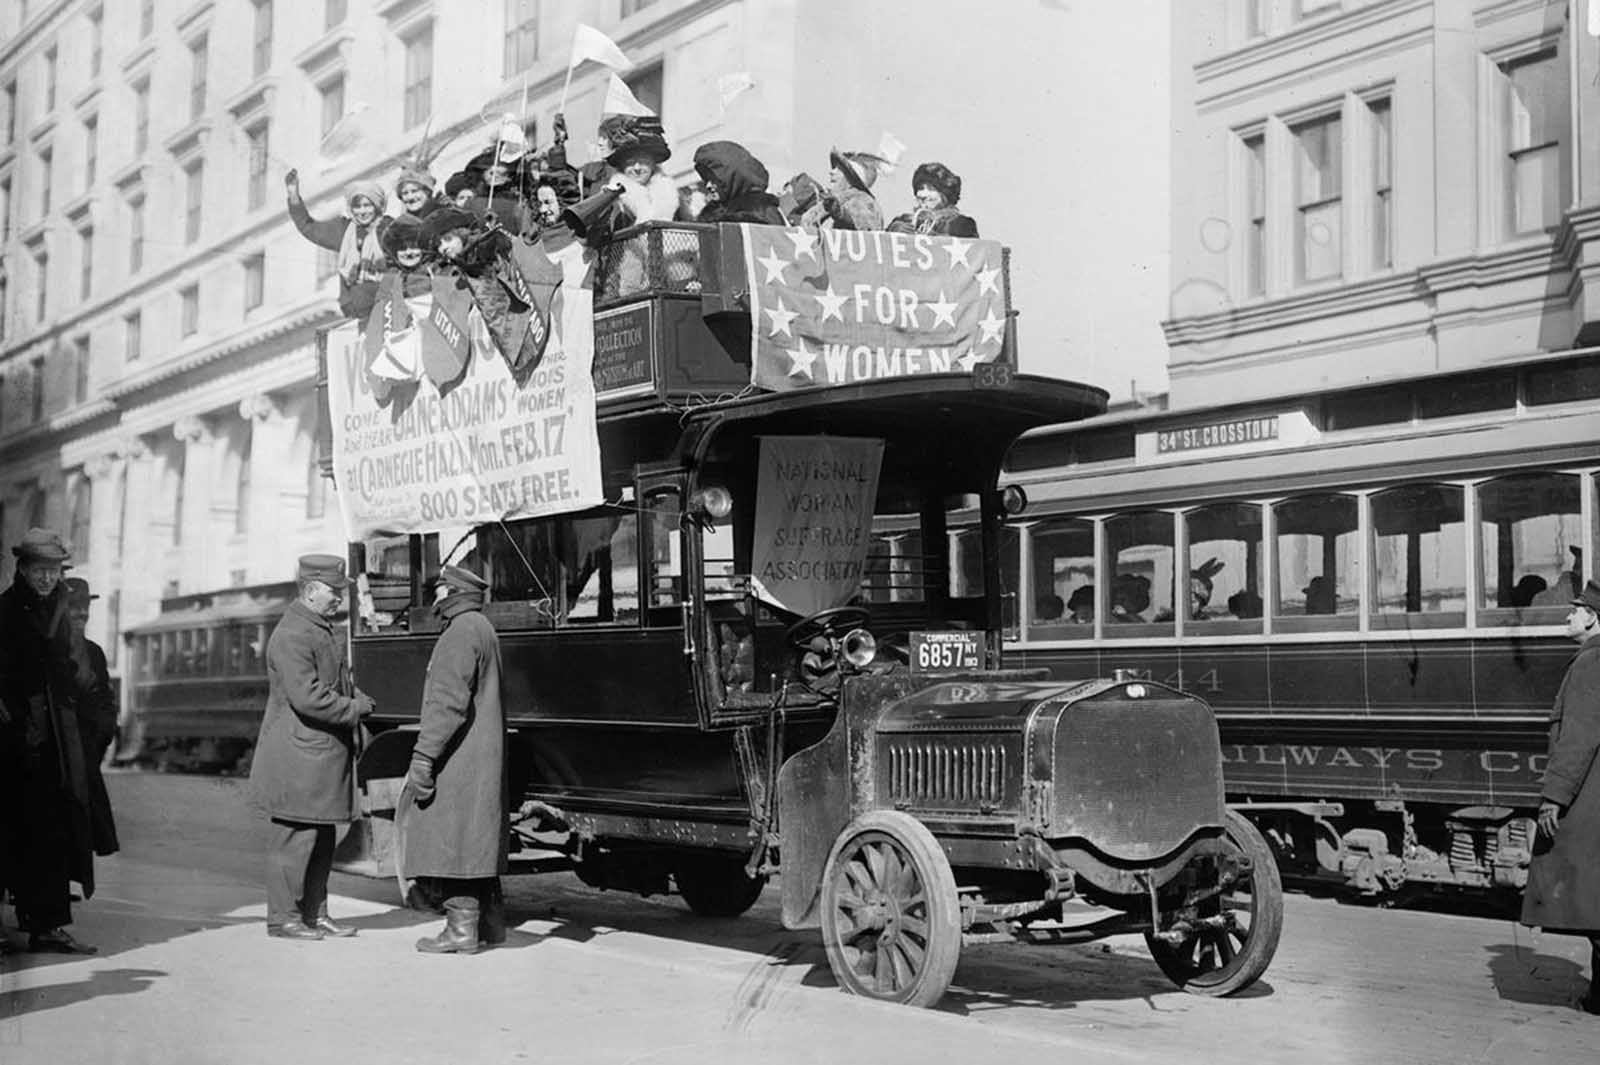 Suffragists on bus in New York City, part of the suffrage hike to Washington, District of Columbia, which joined the March 3, 1913 National American Woman Suffrage Association parade.